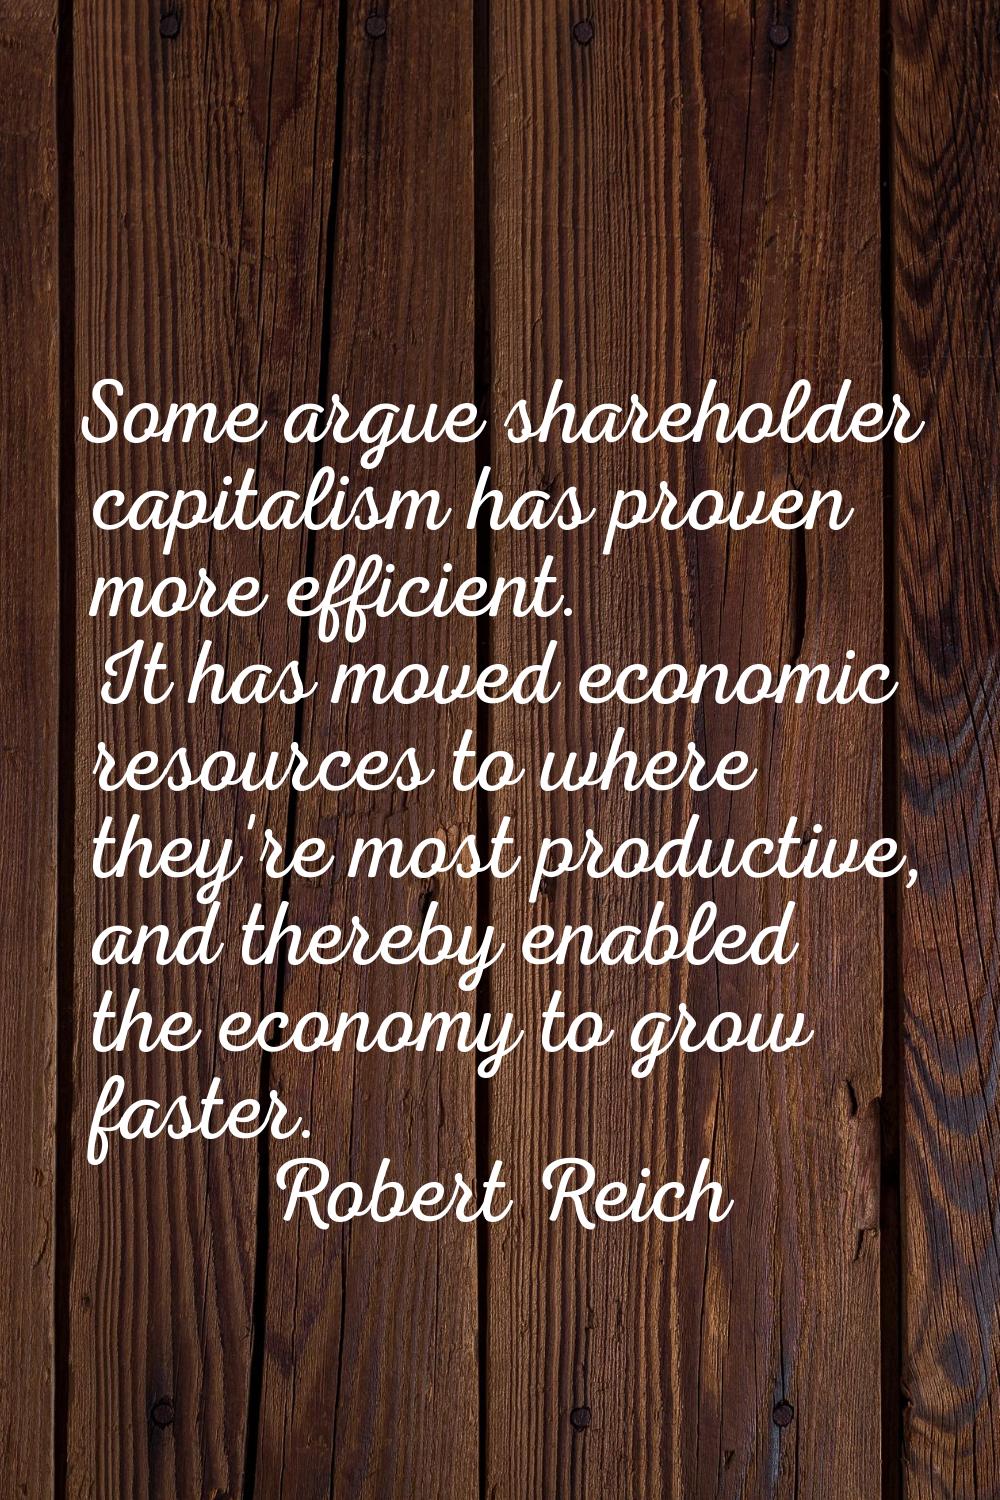 Some argue shareholder capitalism has proven more efficient. It has moved economic resources to whe